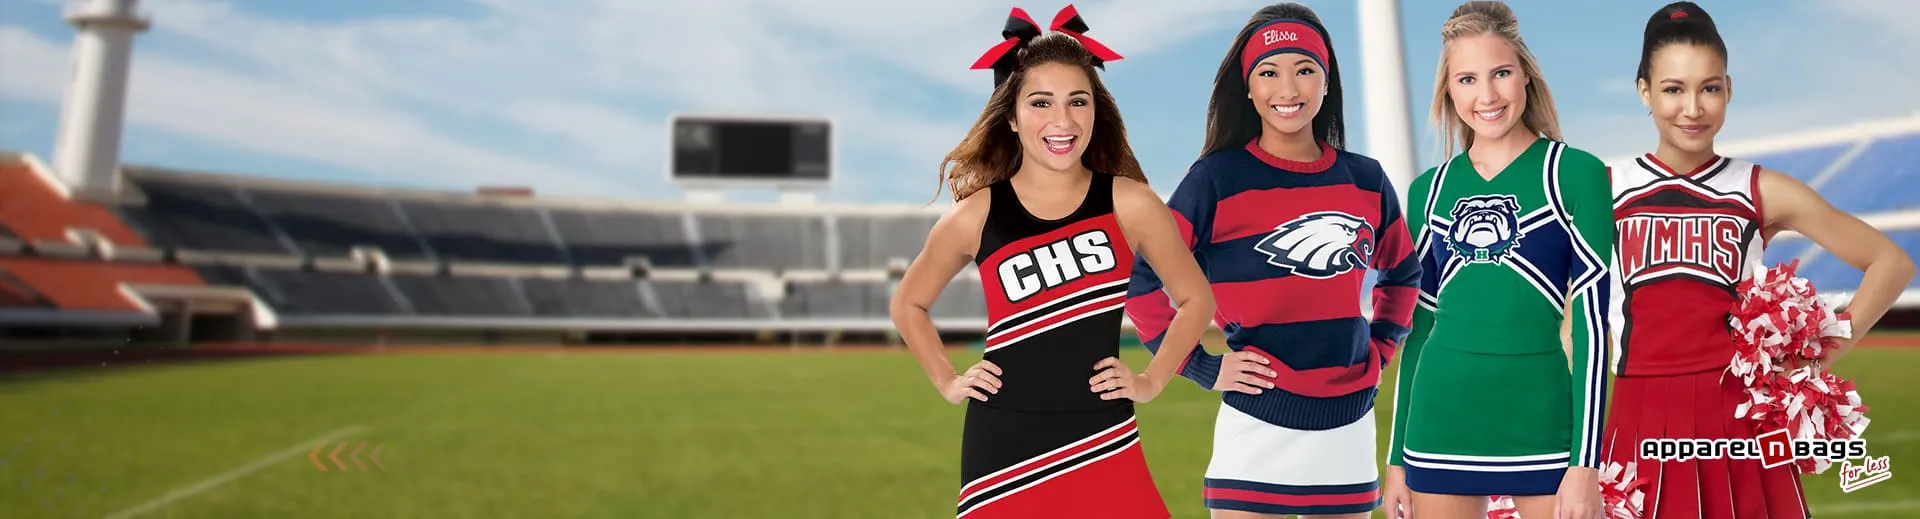 Cheerleading Uniforms for sale in Lackland Air Force Base, Texas, Facebook  Marketplace